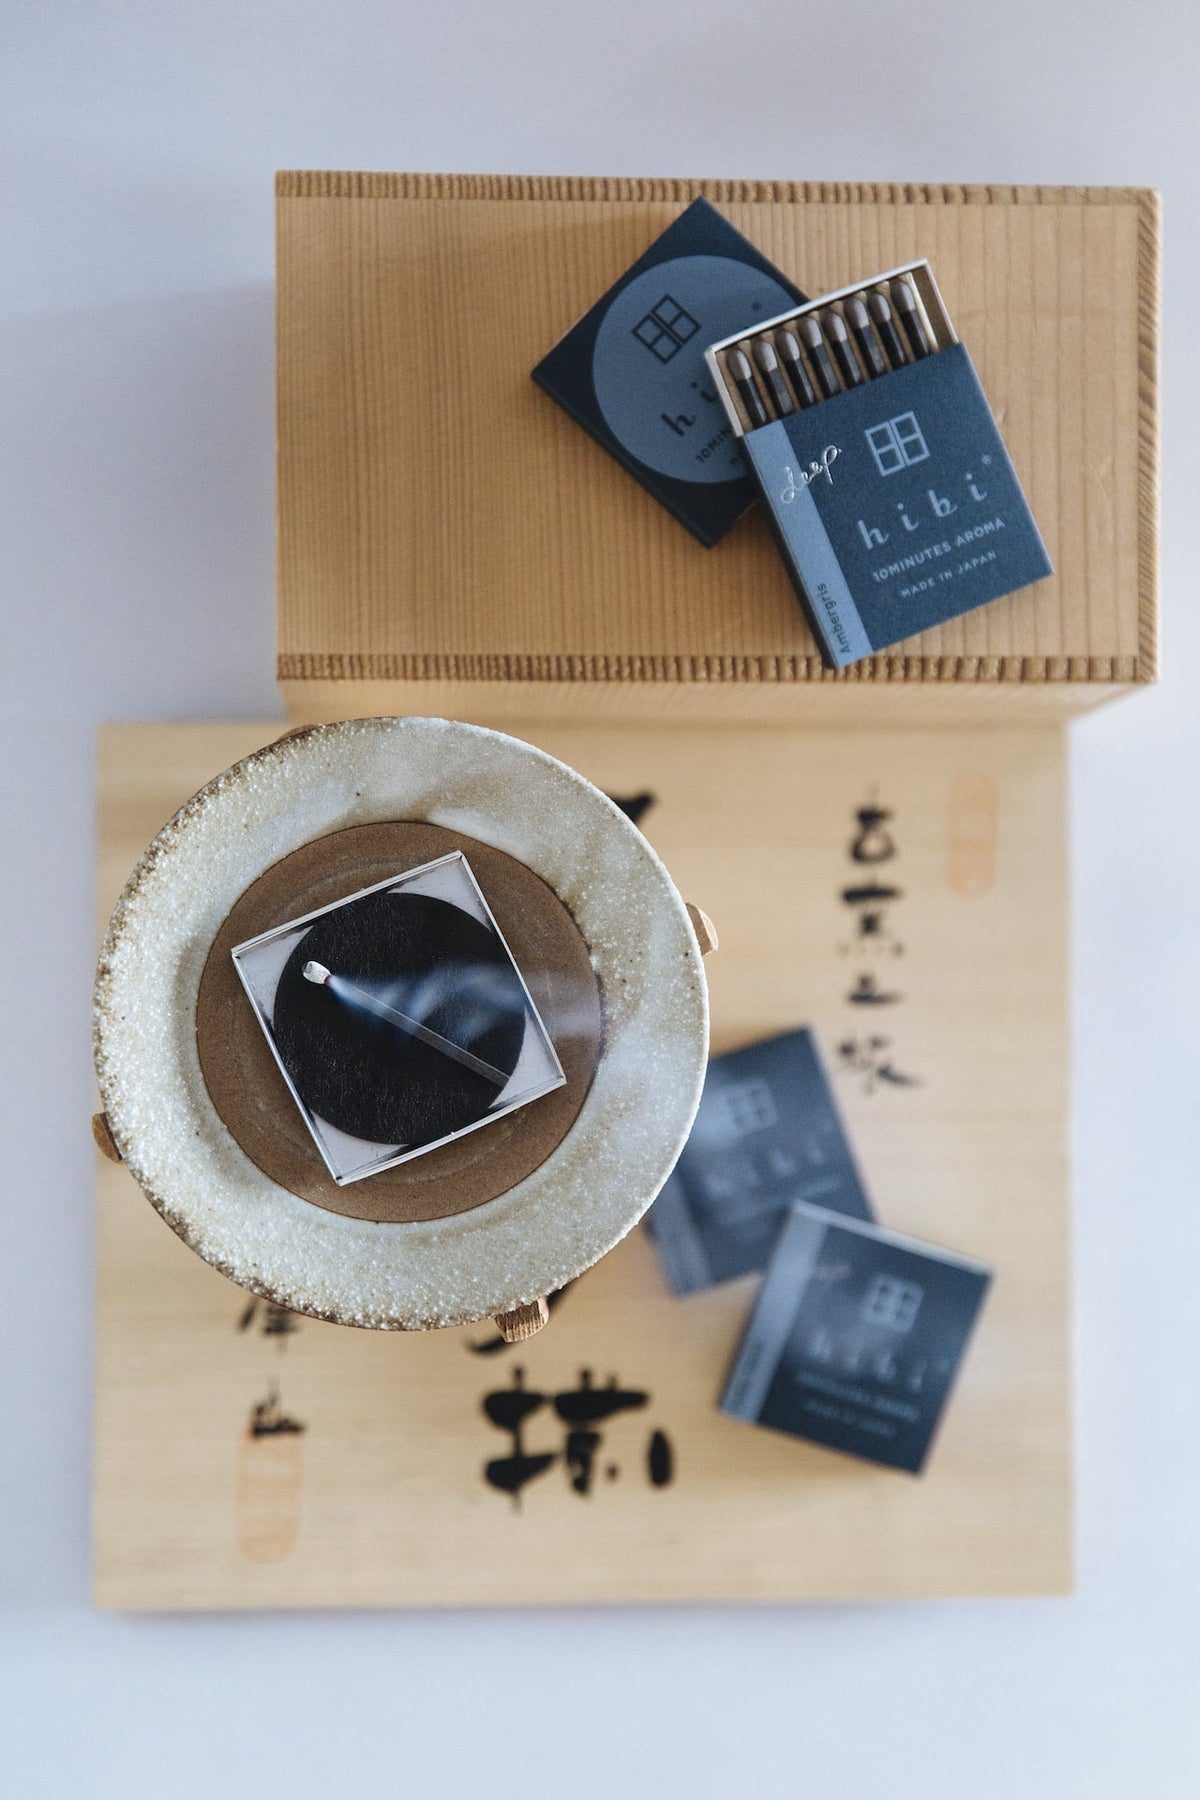 Hibi&#39;s Match Box Incense - Deep Scent Gift Box in a wooden box.